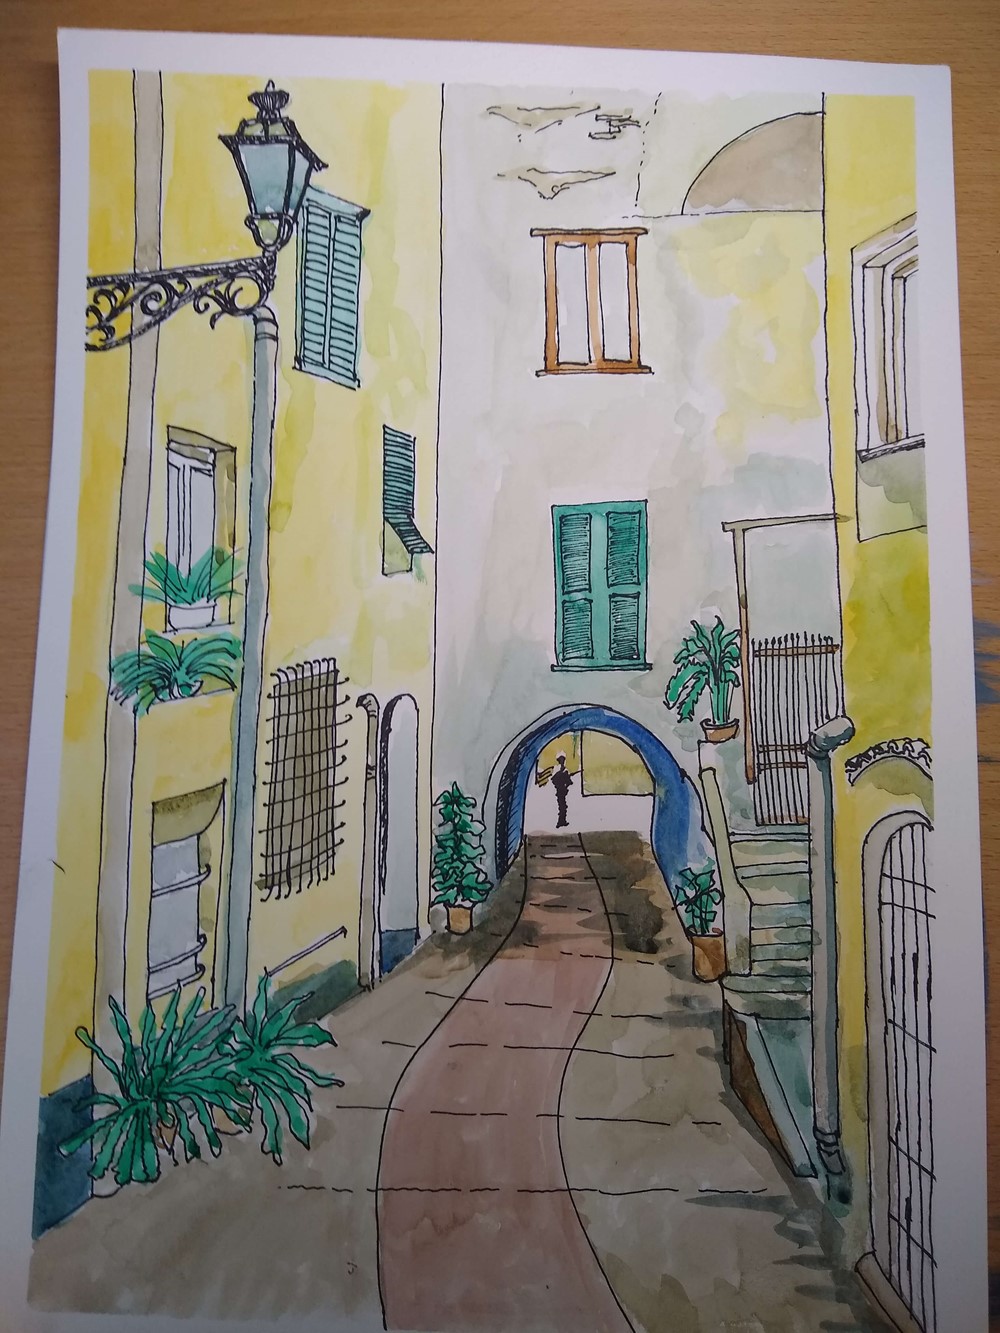 Student work of a building from a sketching and drawing course